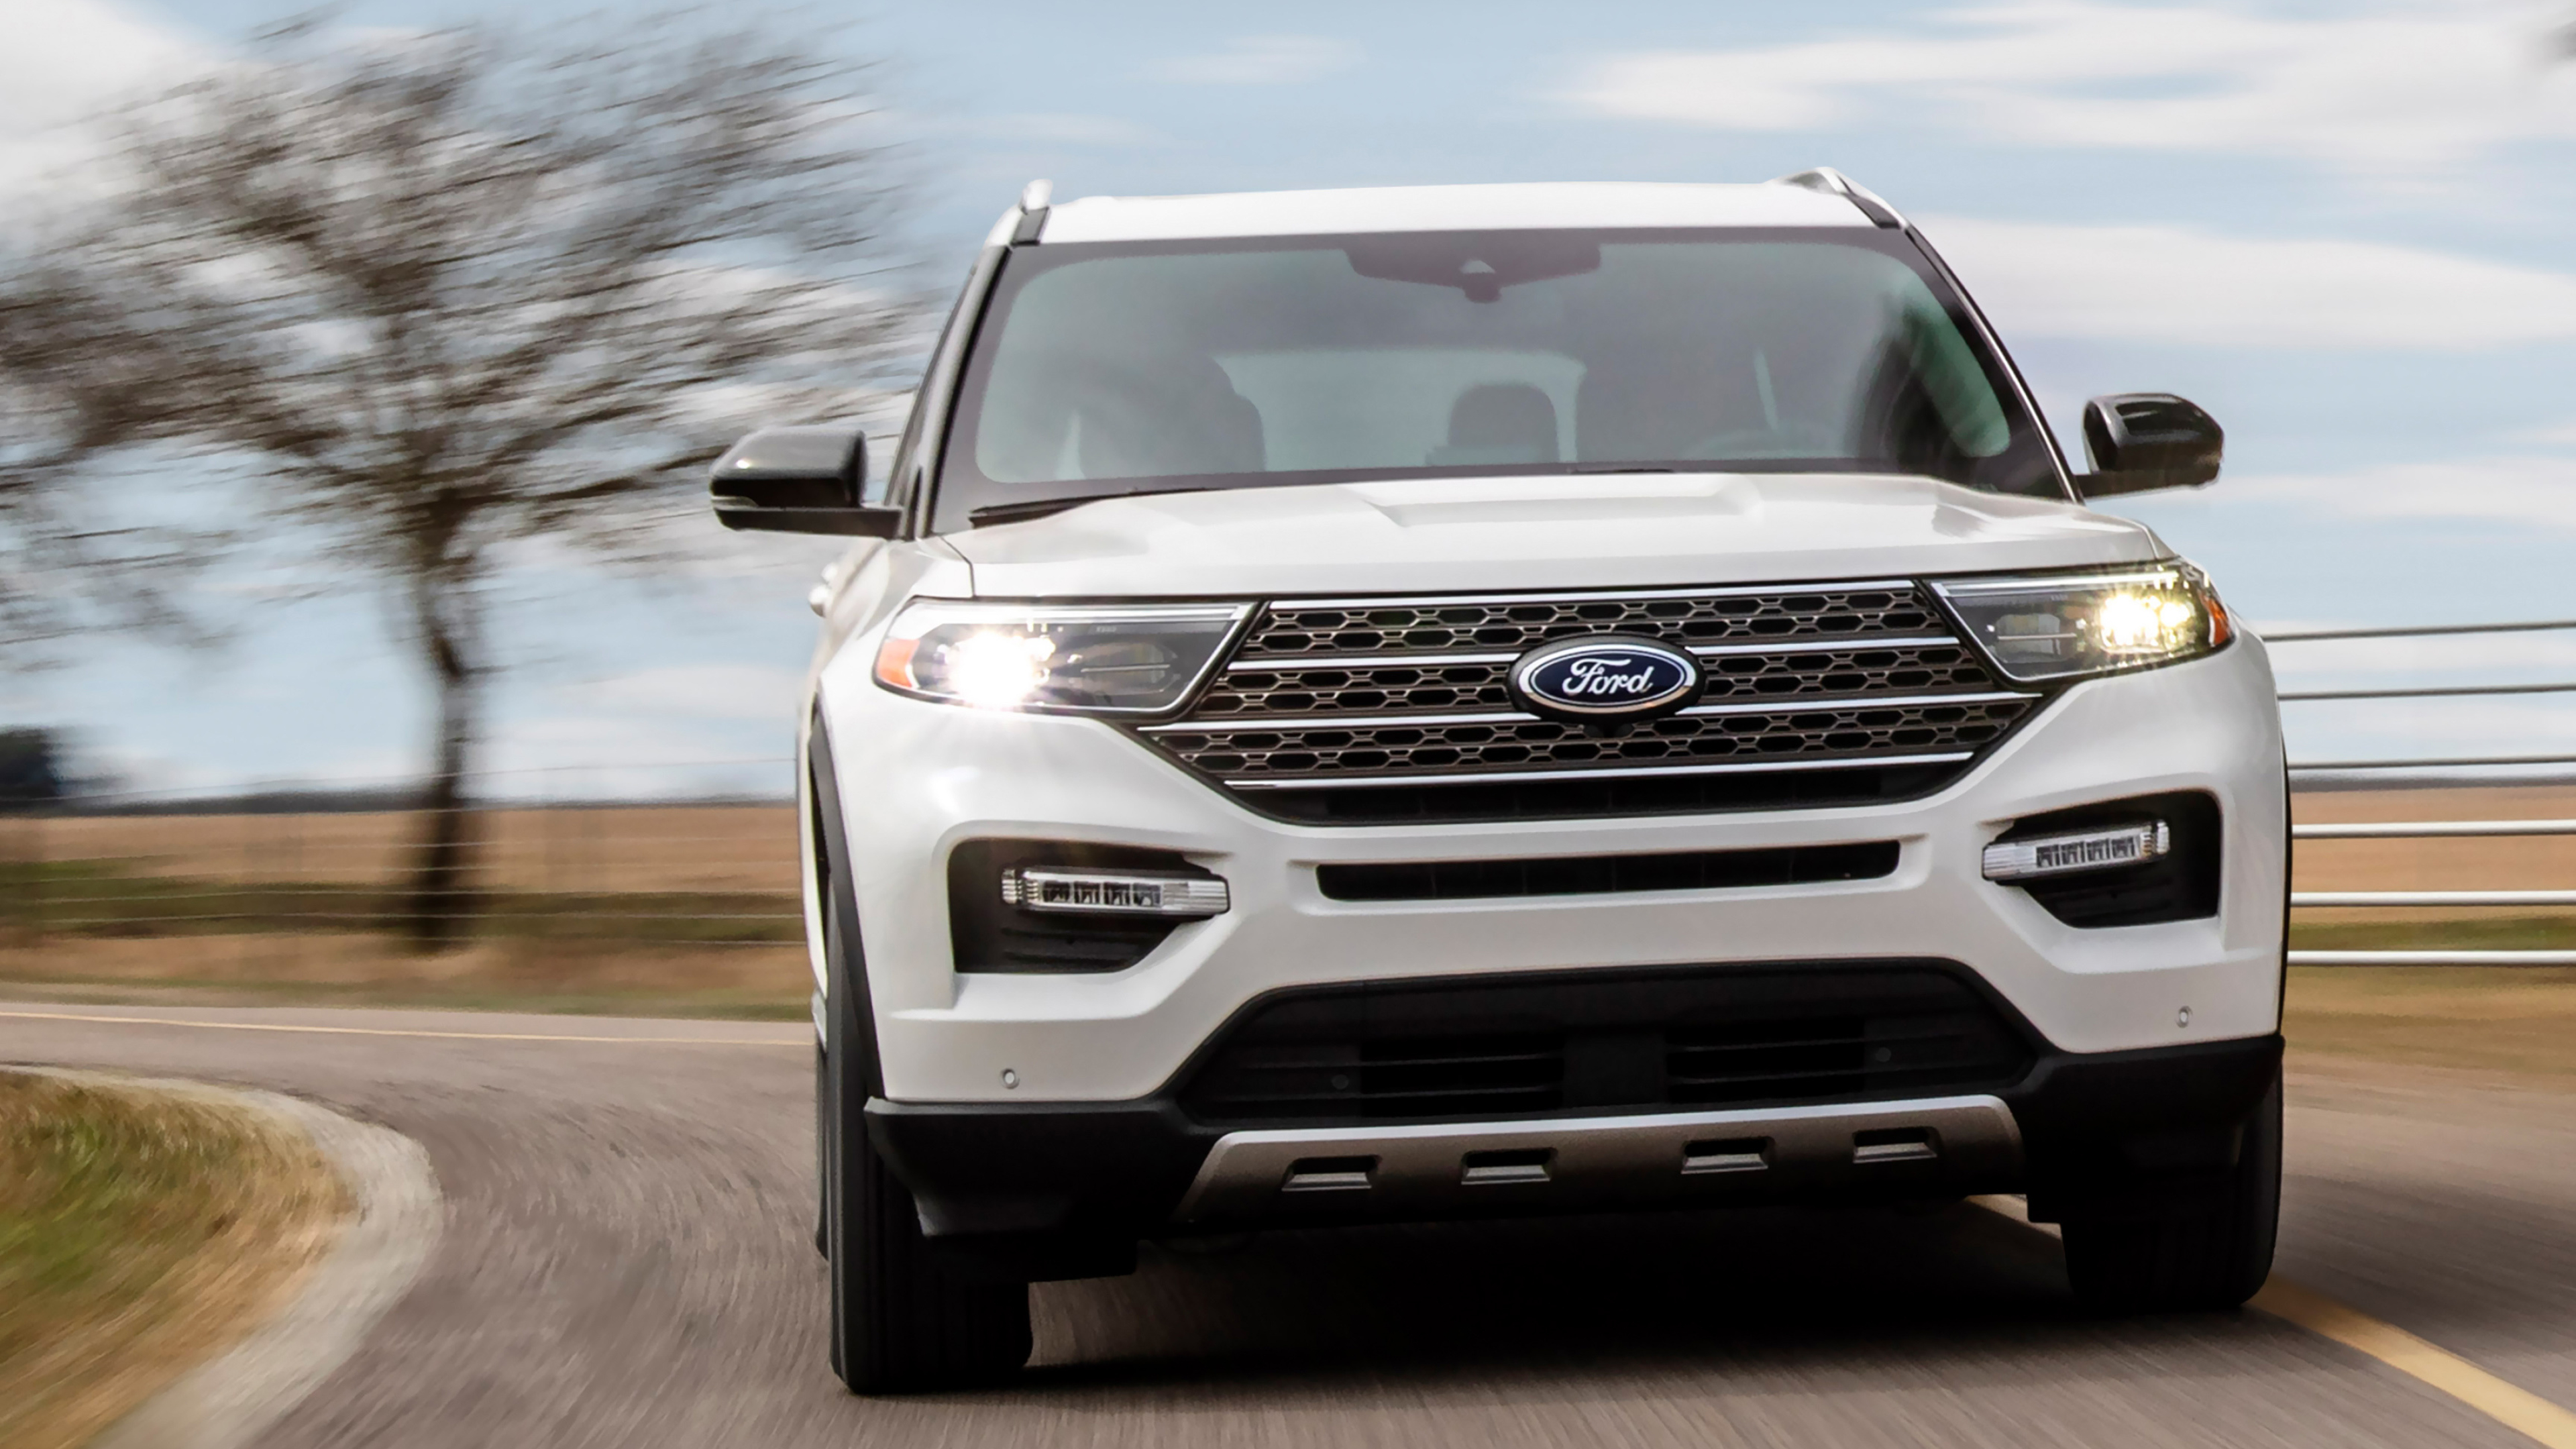 Ford Explorer, King Ranch edition, High-quality wallpapers, Stylish SUV, 3840x2160 4K Desktop